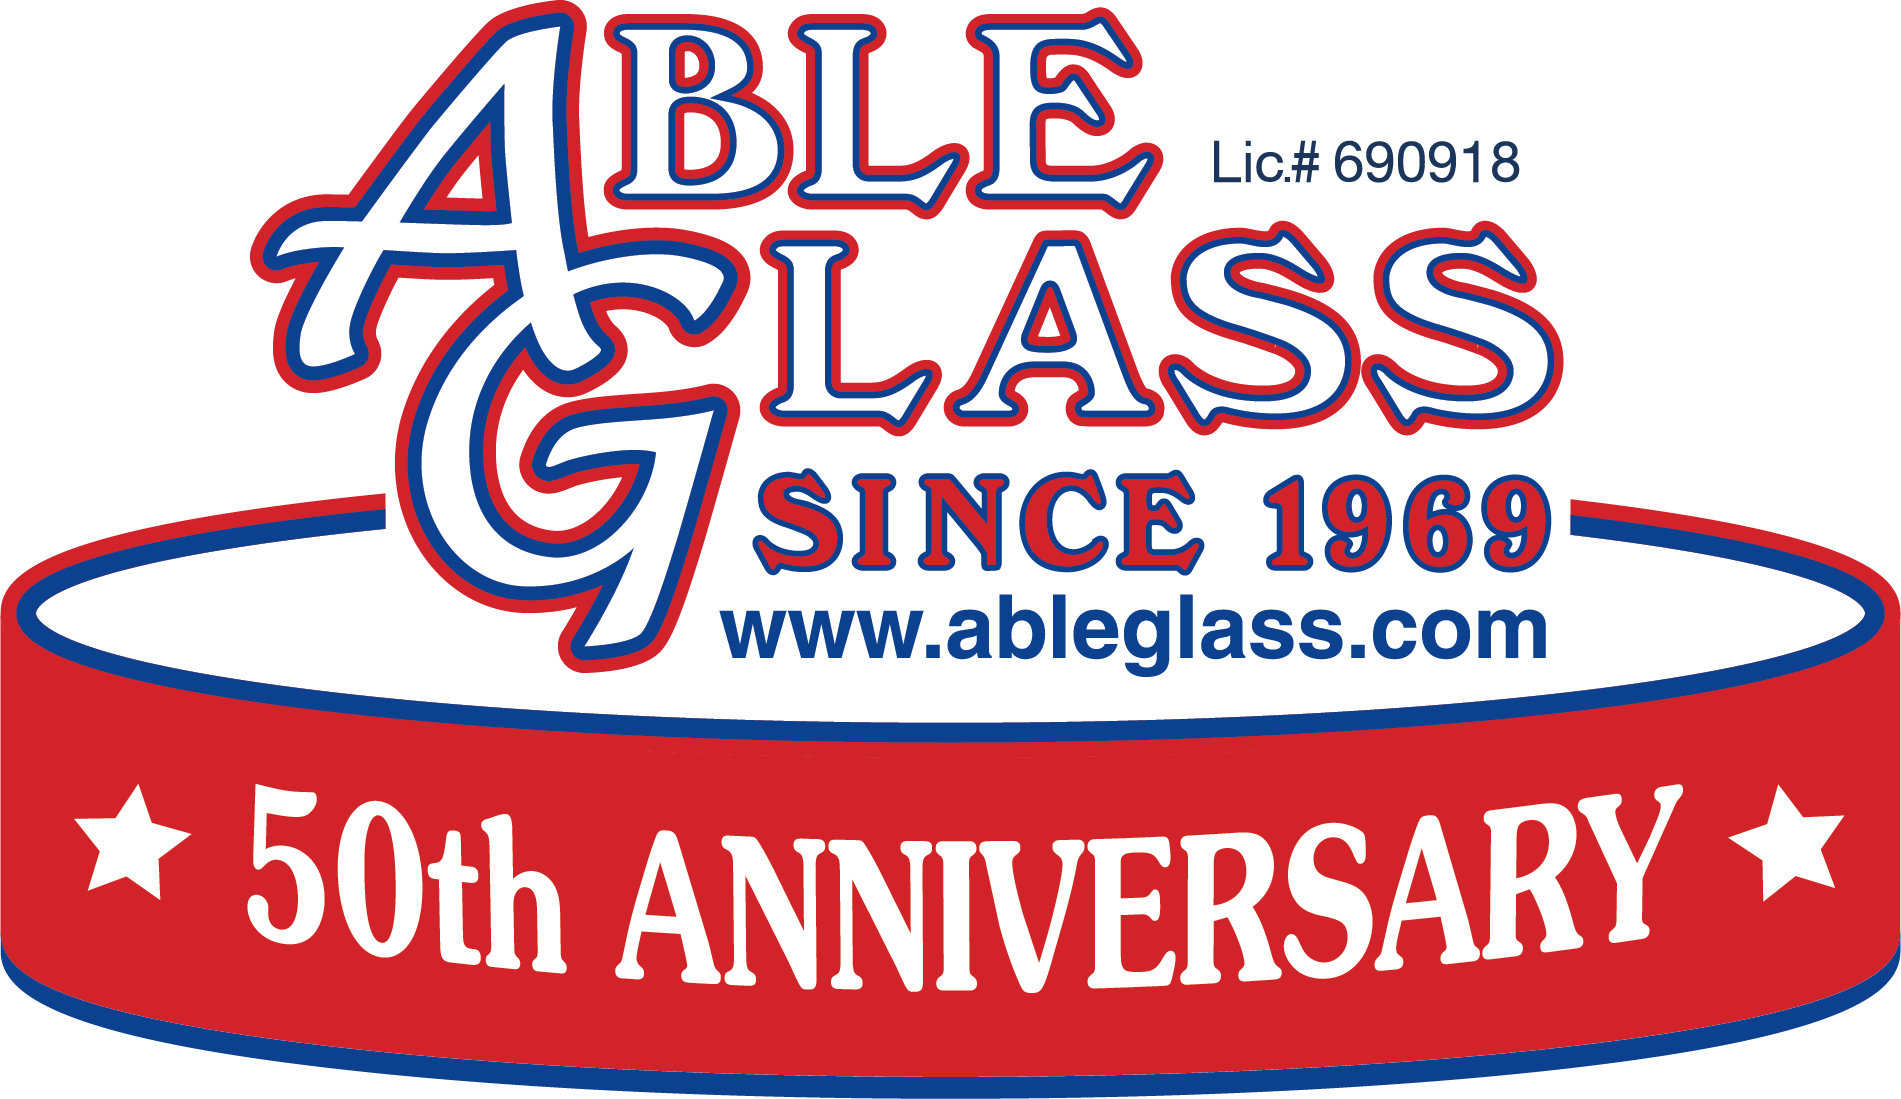 Company logo of Able Glass